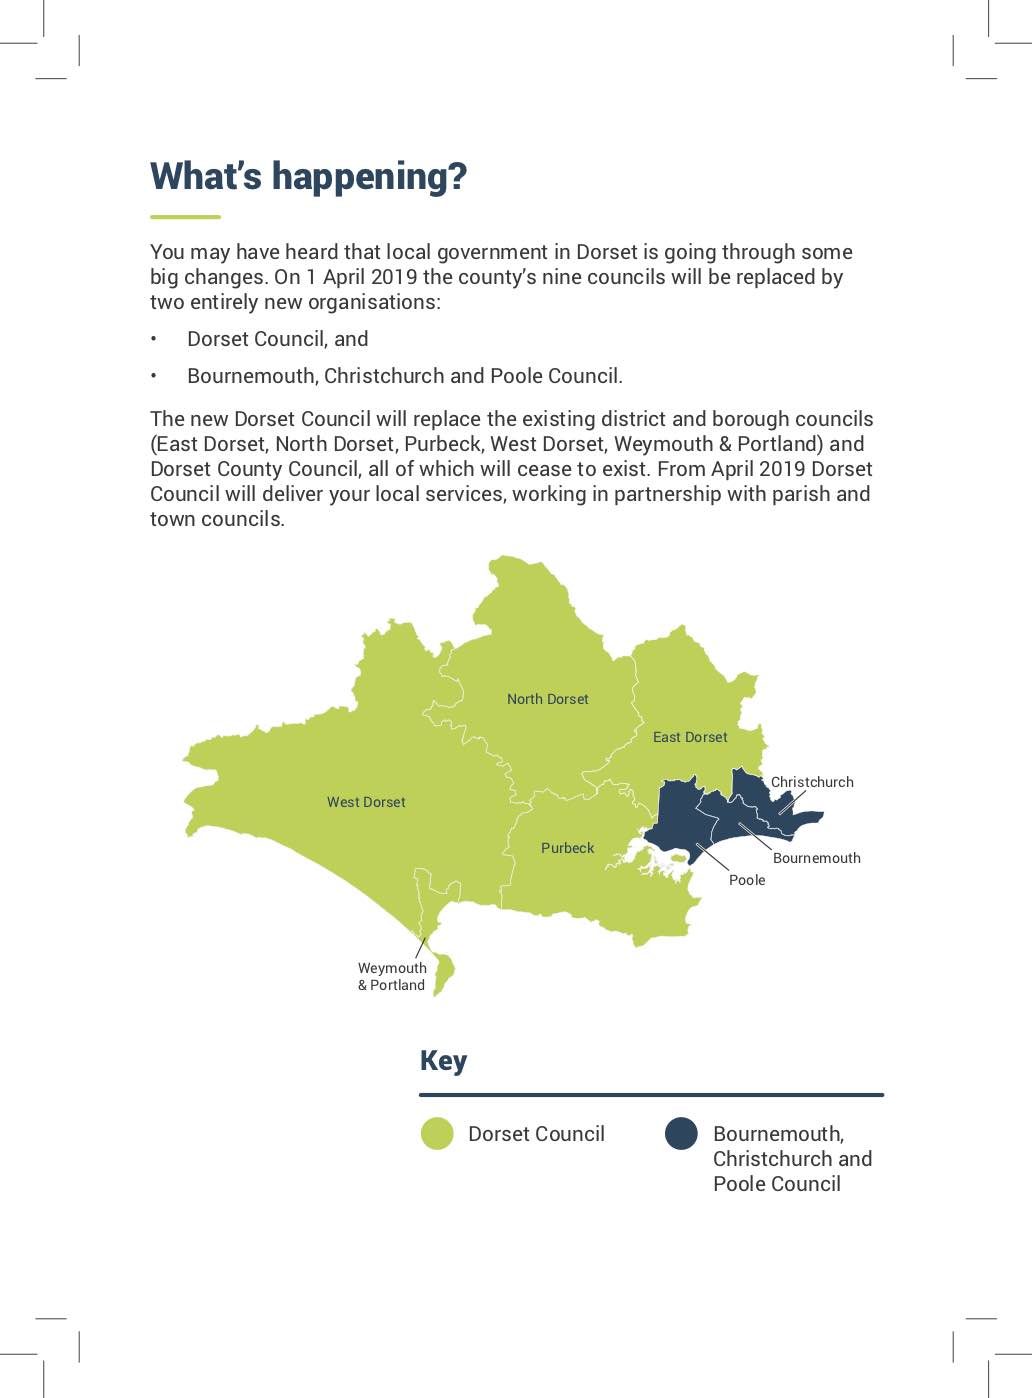 Changes to Dorset Councils from 2019